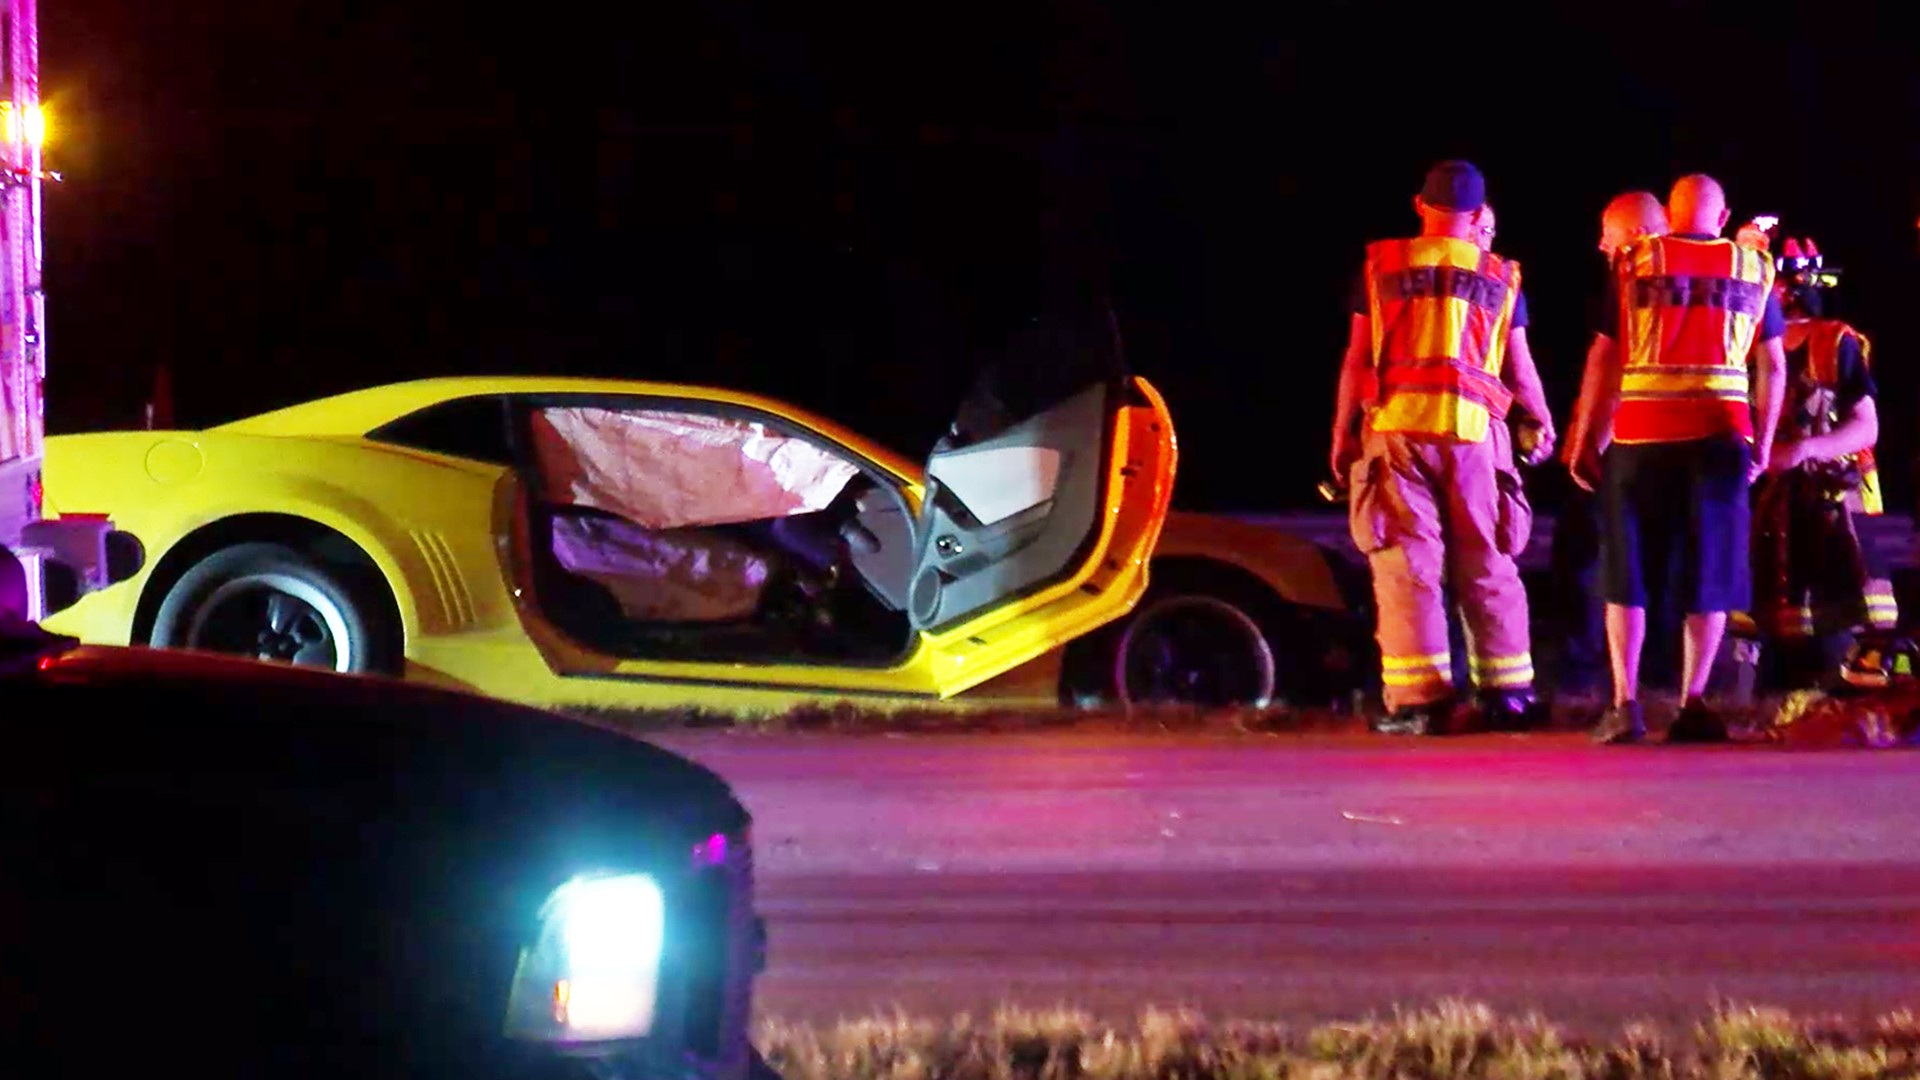 The crash was reported late Monday, Oct. 28, 2019 eastbound on Grand Parkway at FM 2920. Witnesses said they saw a yellow Camaro and a motorcycle racing.